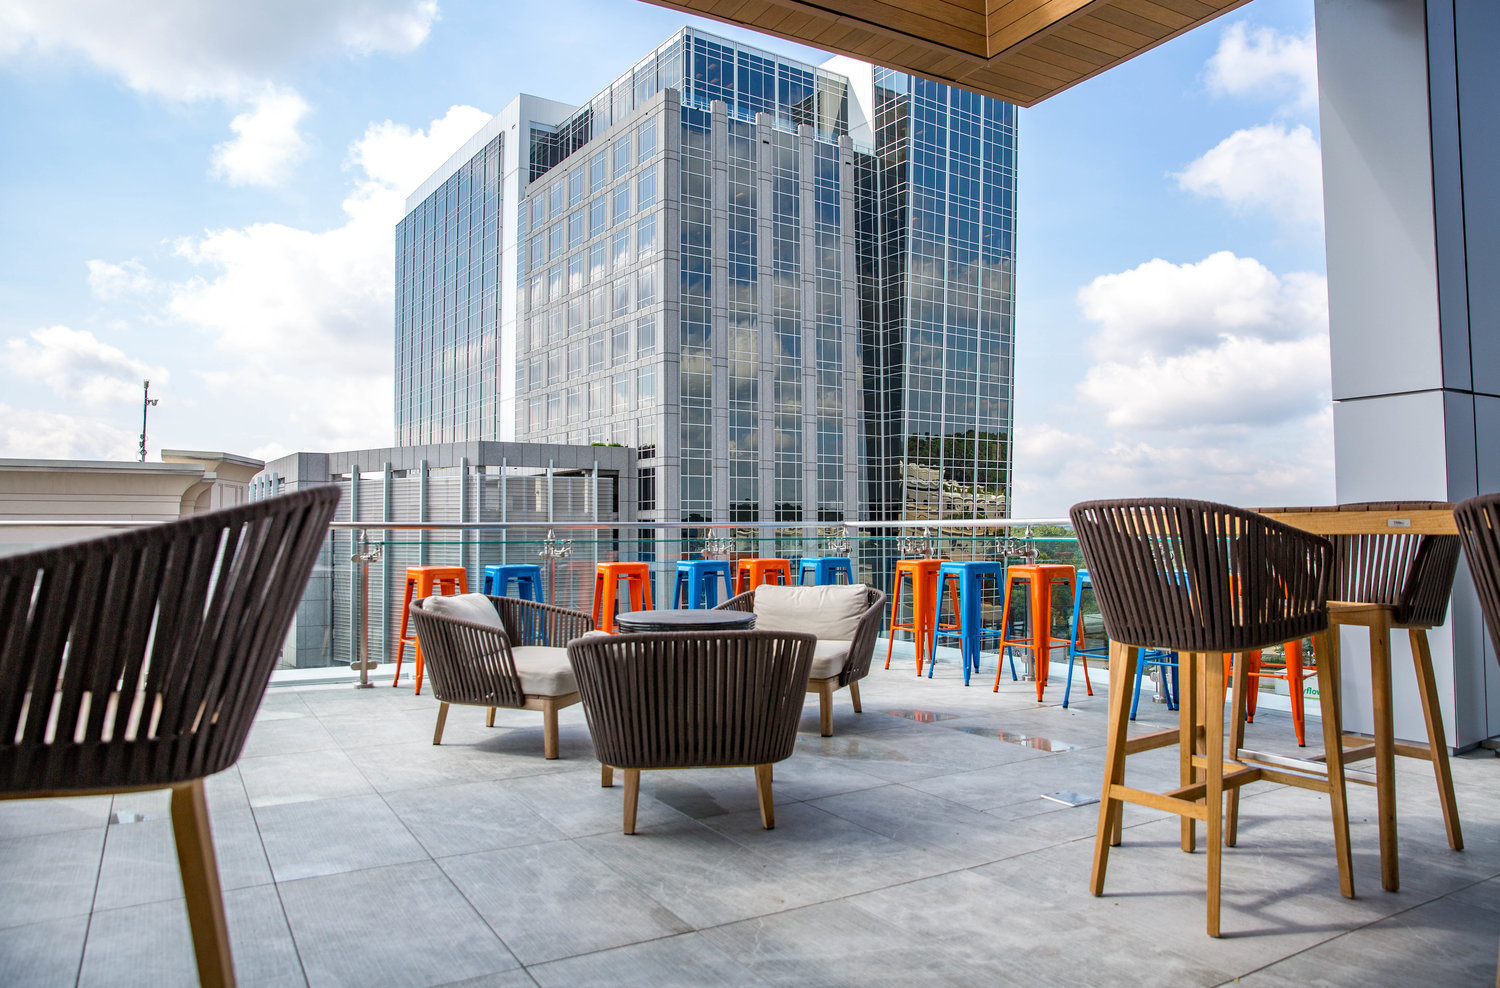 Level 7 Rooftop Bar, Raleigh, NC Jobs | Hospitality Online